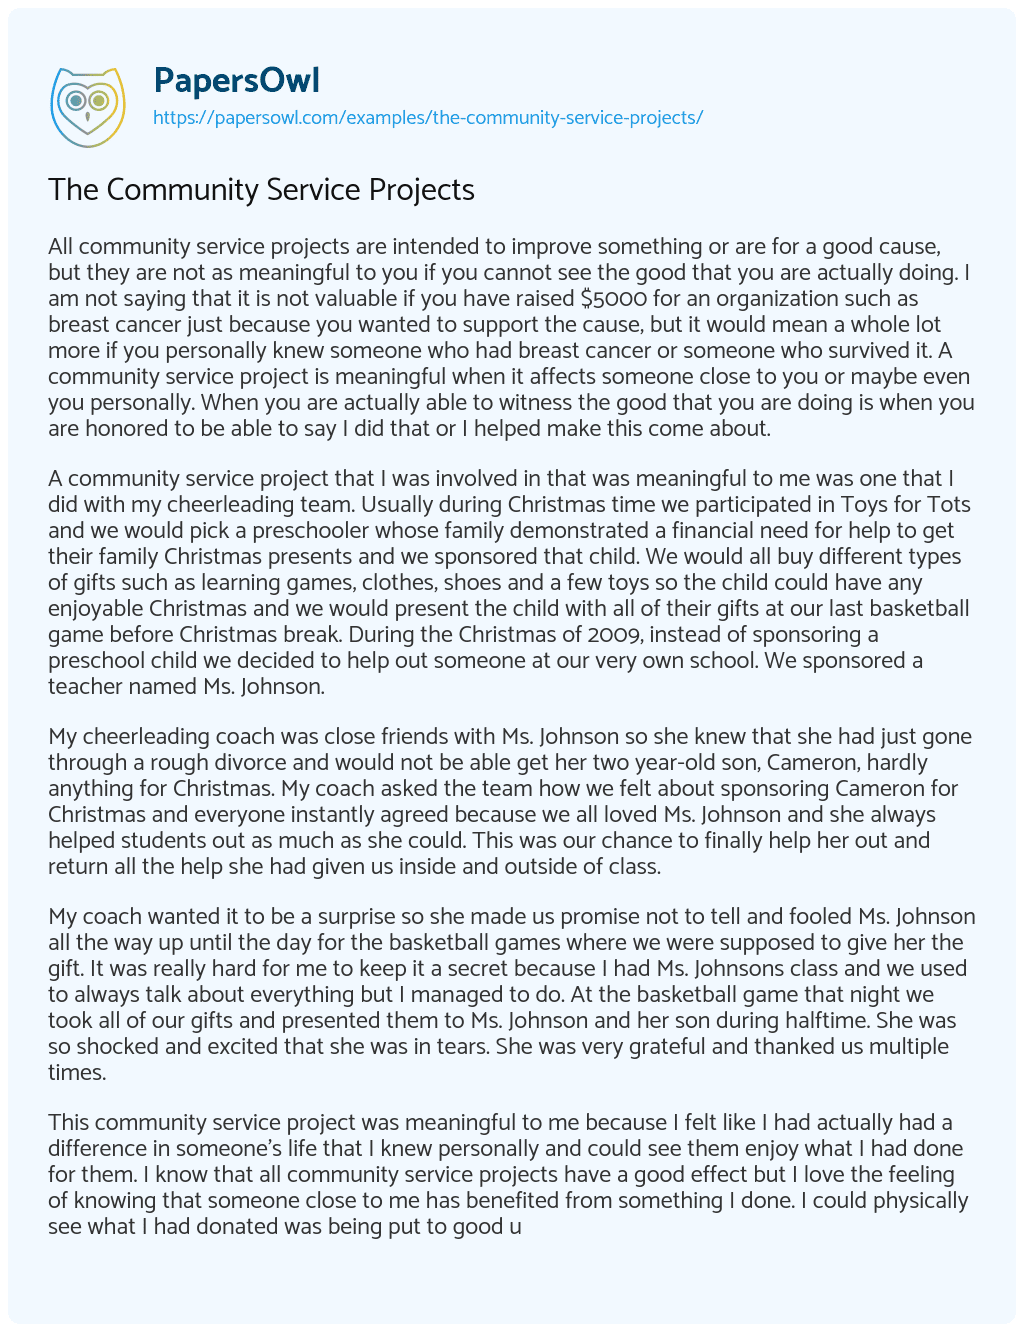 The Community Service Projects essay